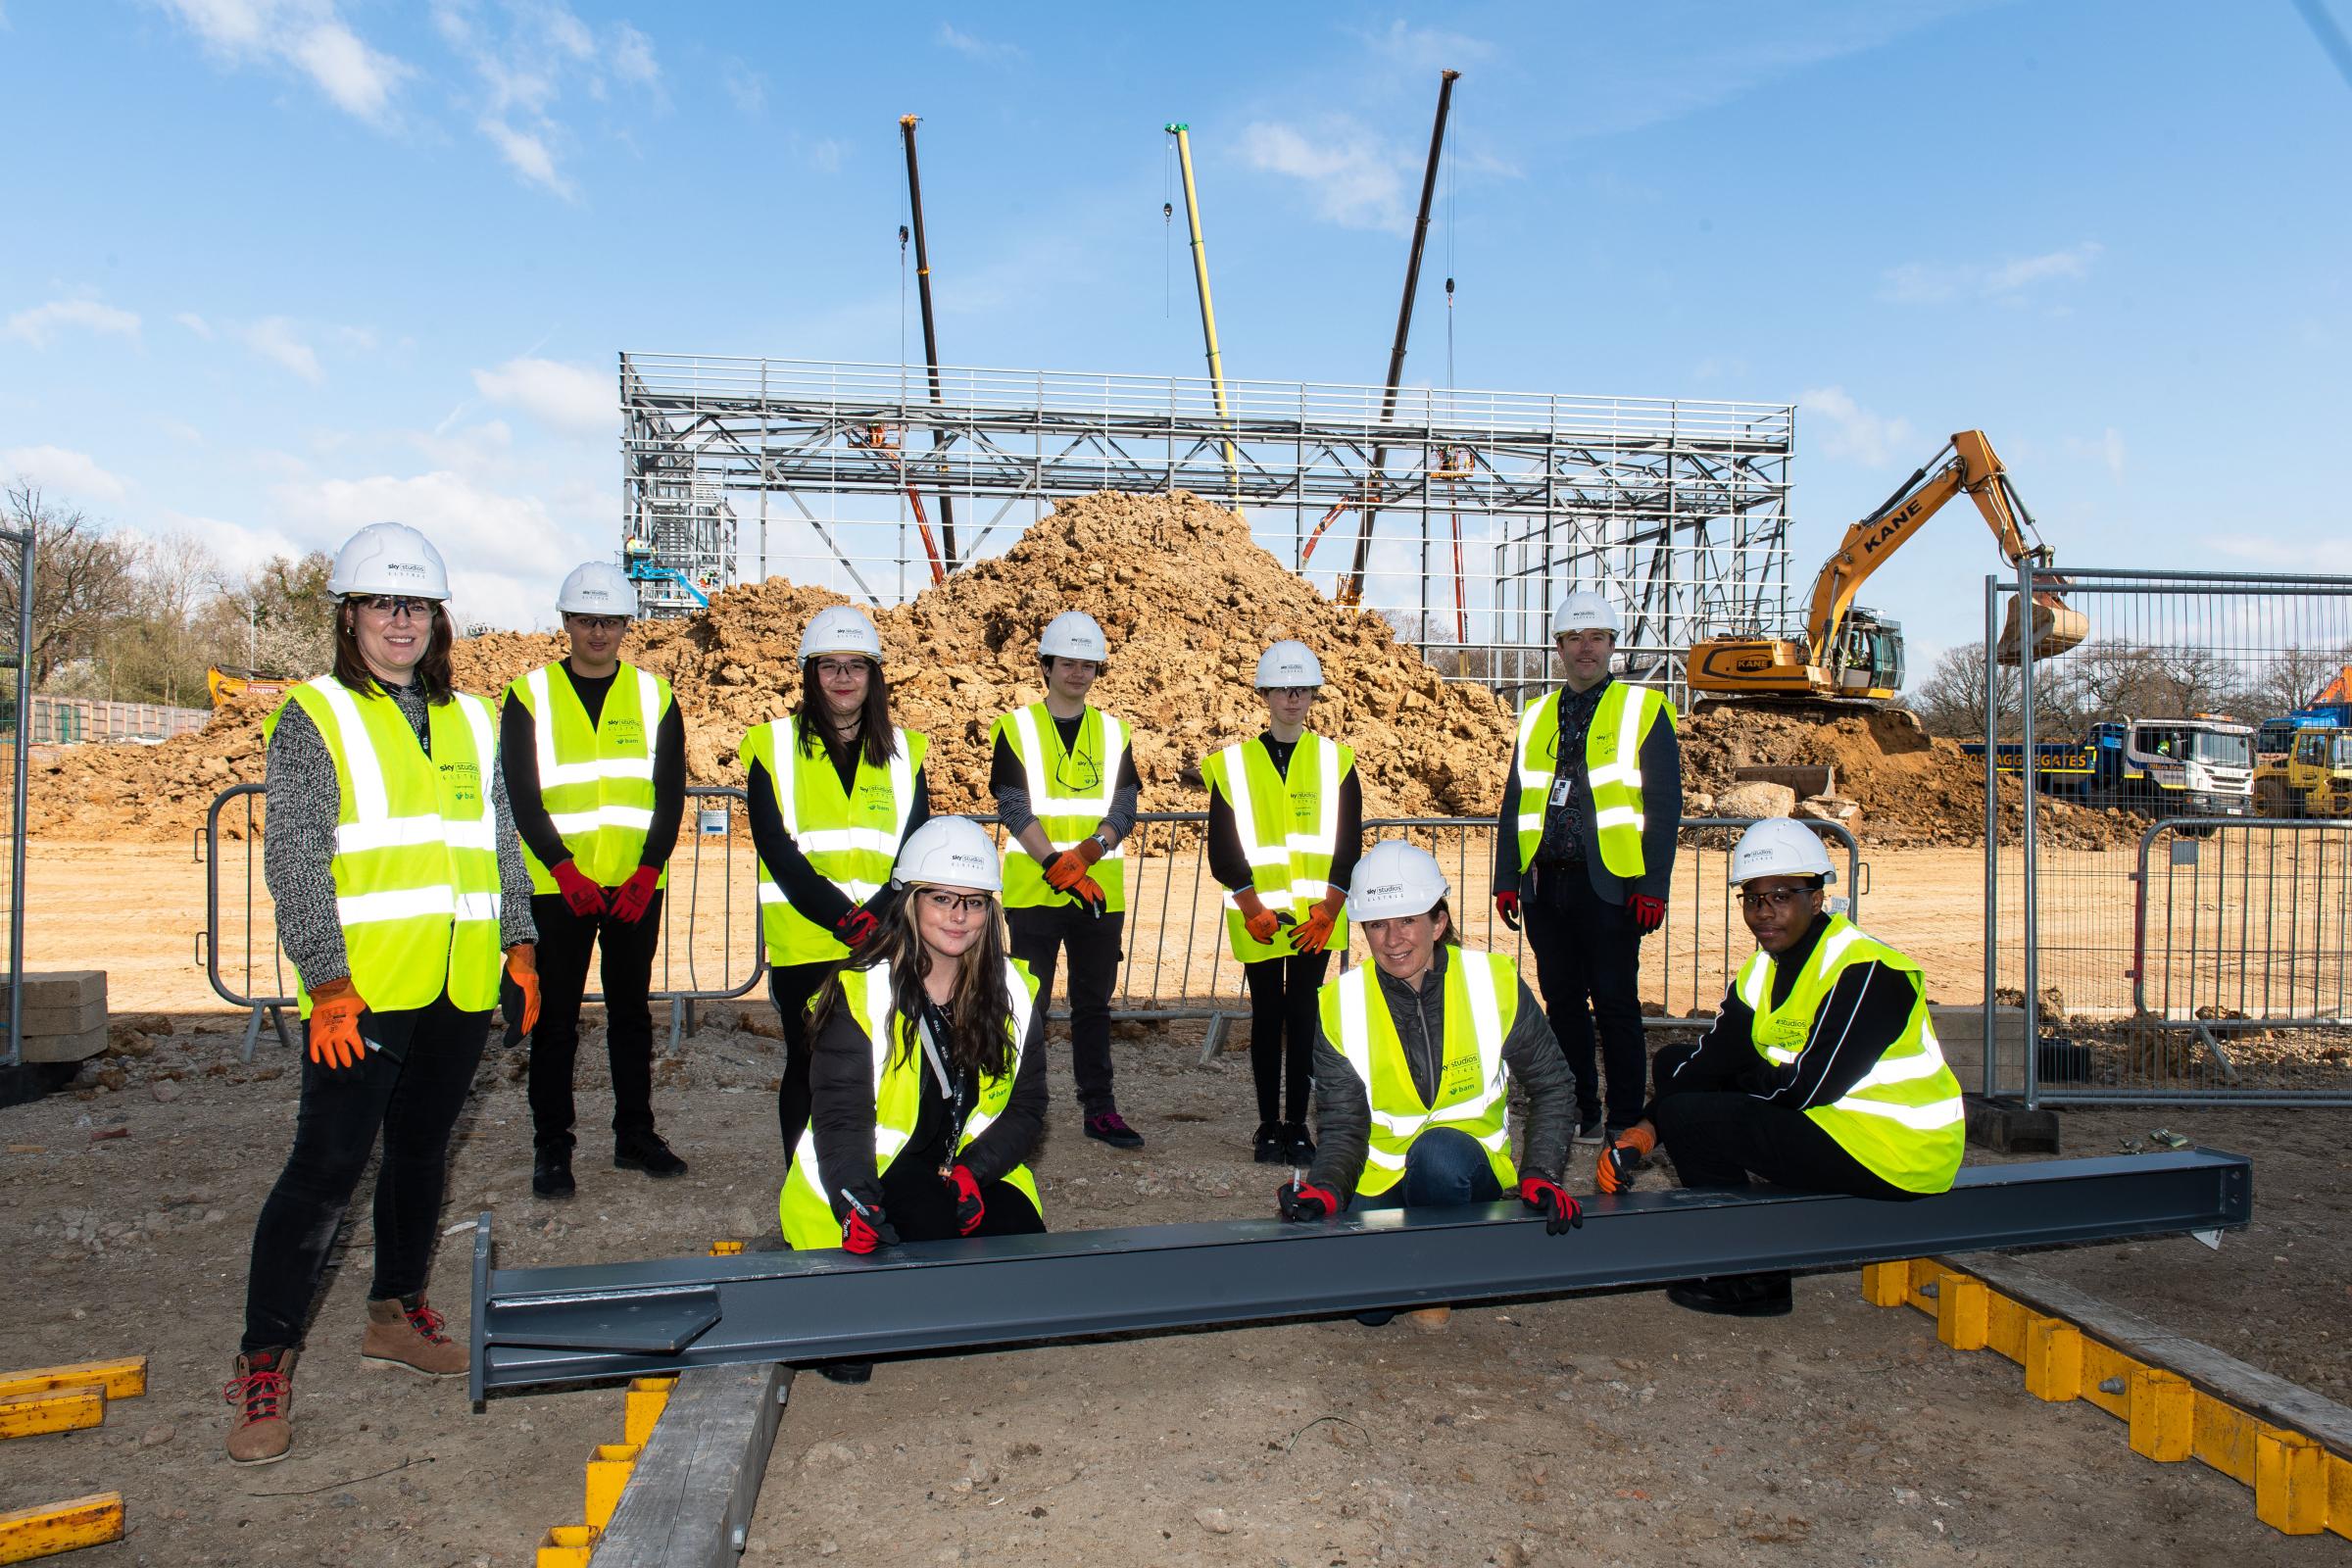 Students from Elstree Screen Arts Academy recently partnered with Sky Studios. They are pictured at the construction site off Rowley Lane